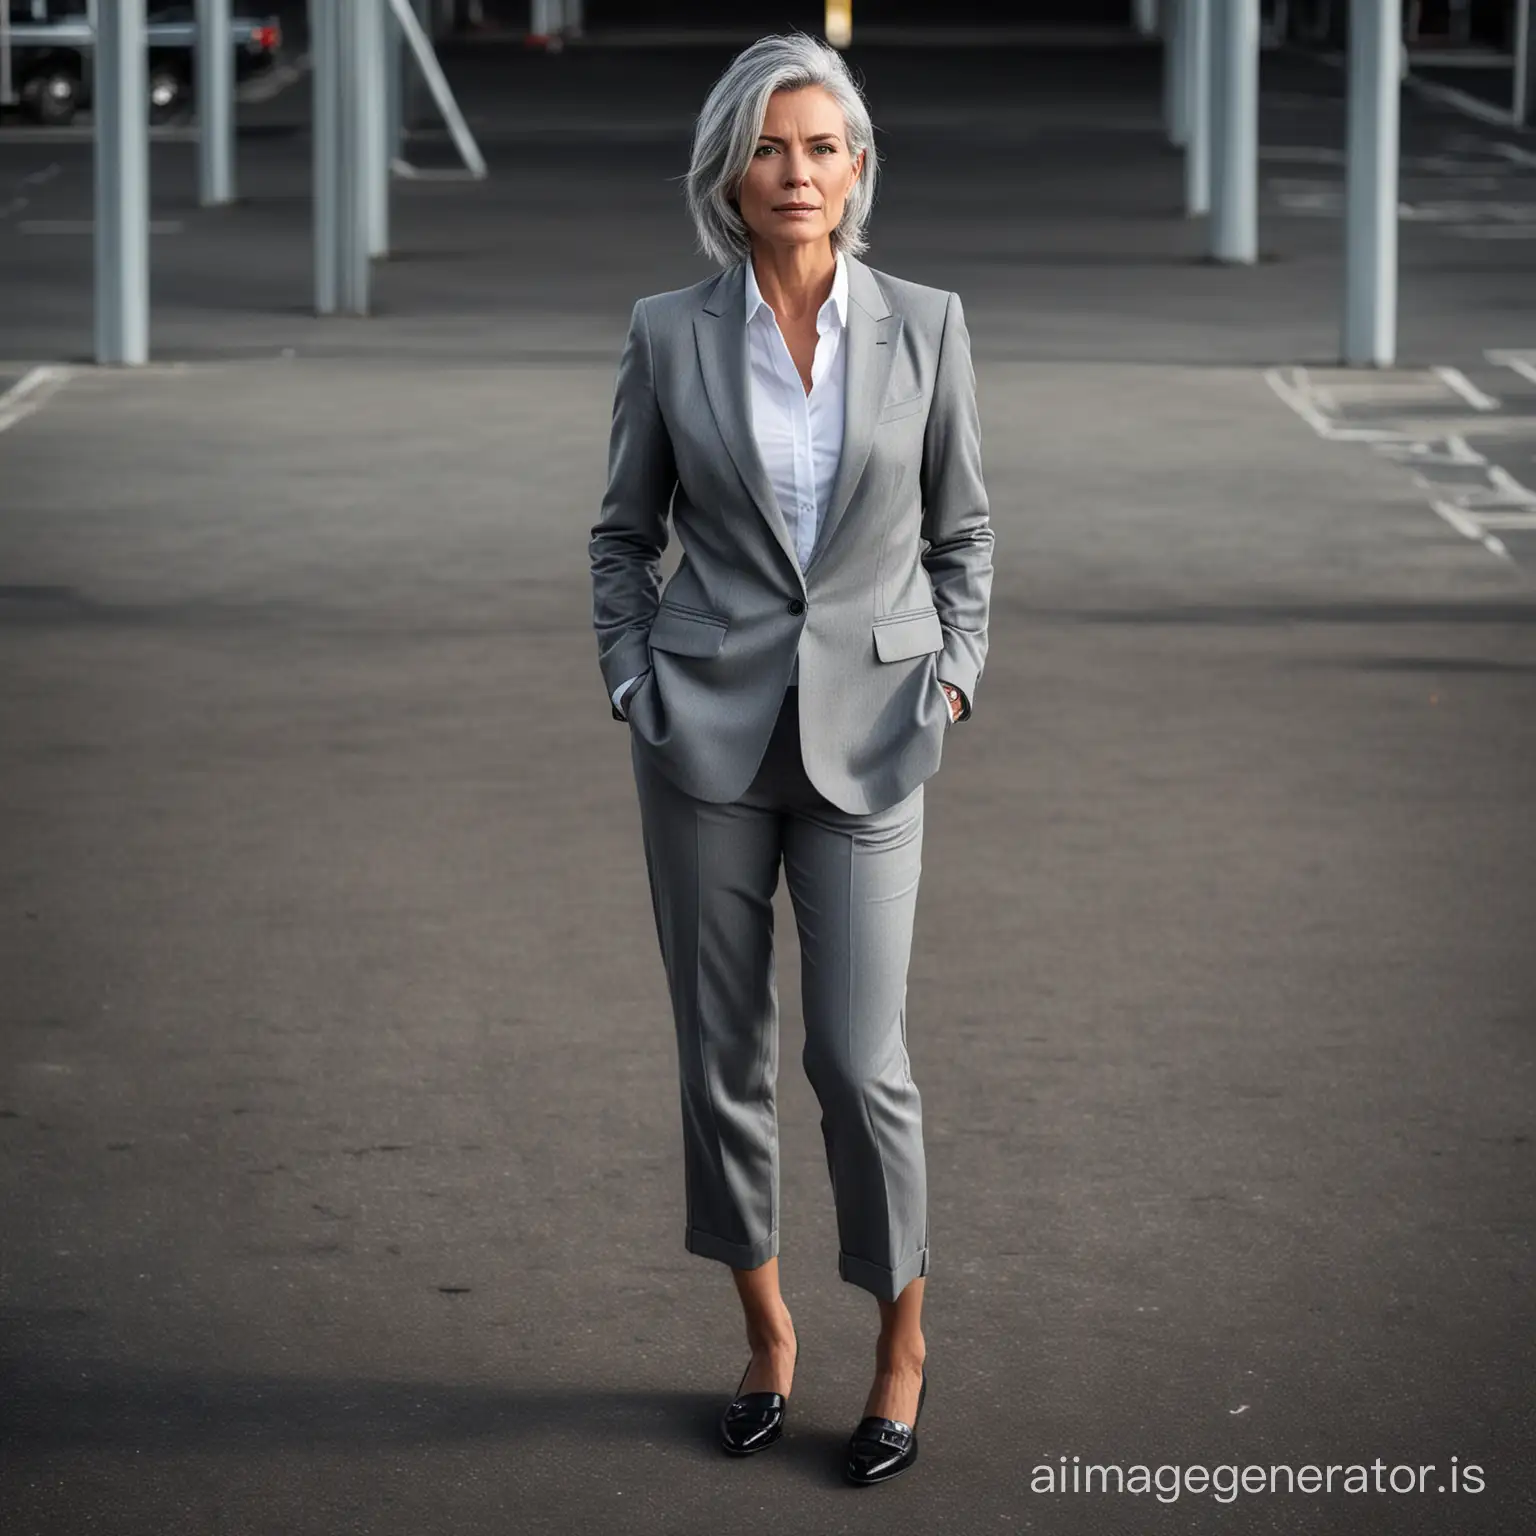 woman 50 years old, casual style, grey suits, white shirt, black shoes ,grey hair, full body shot, in a parking, dramatic lighting